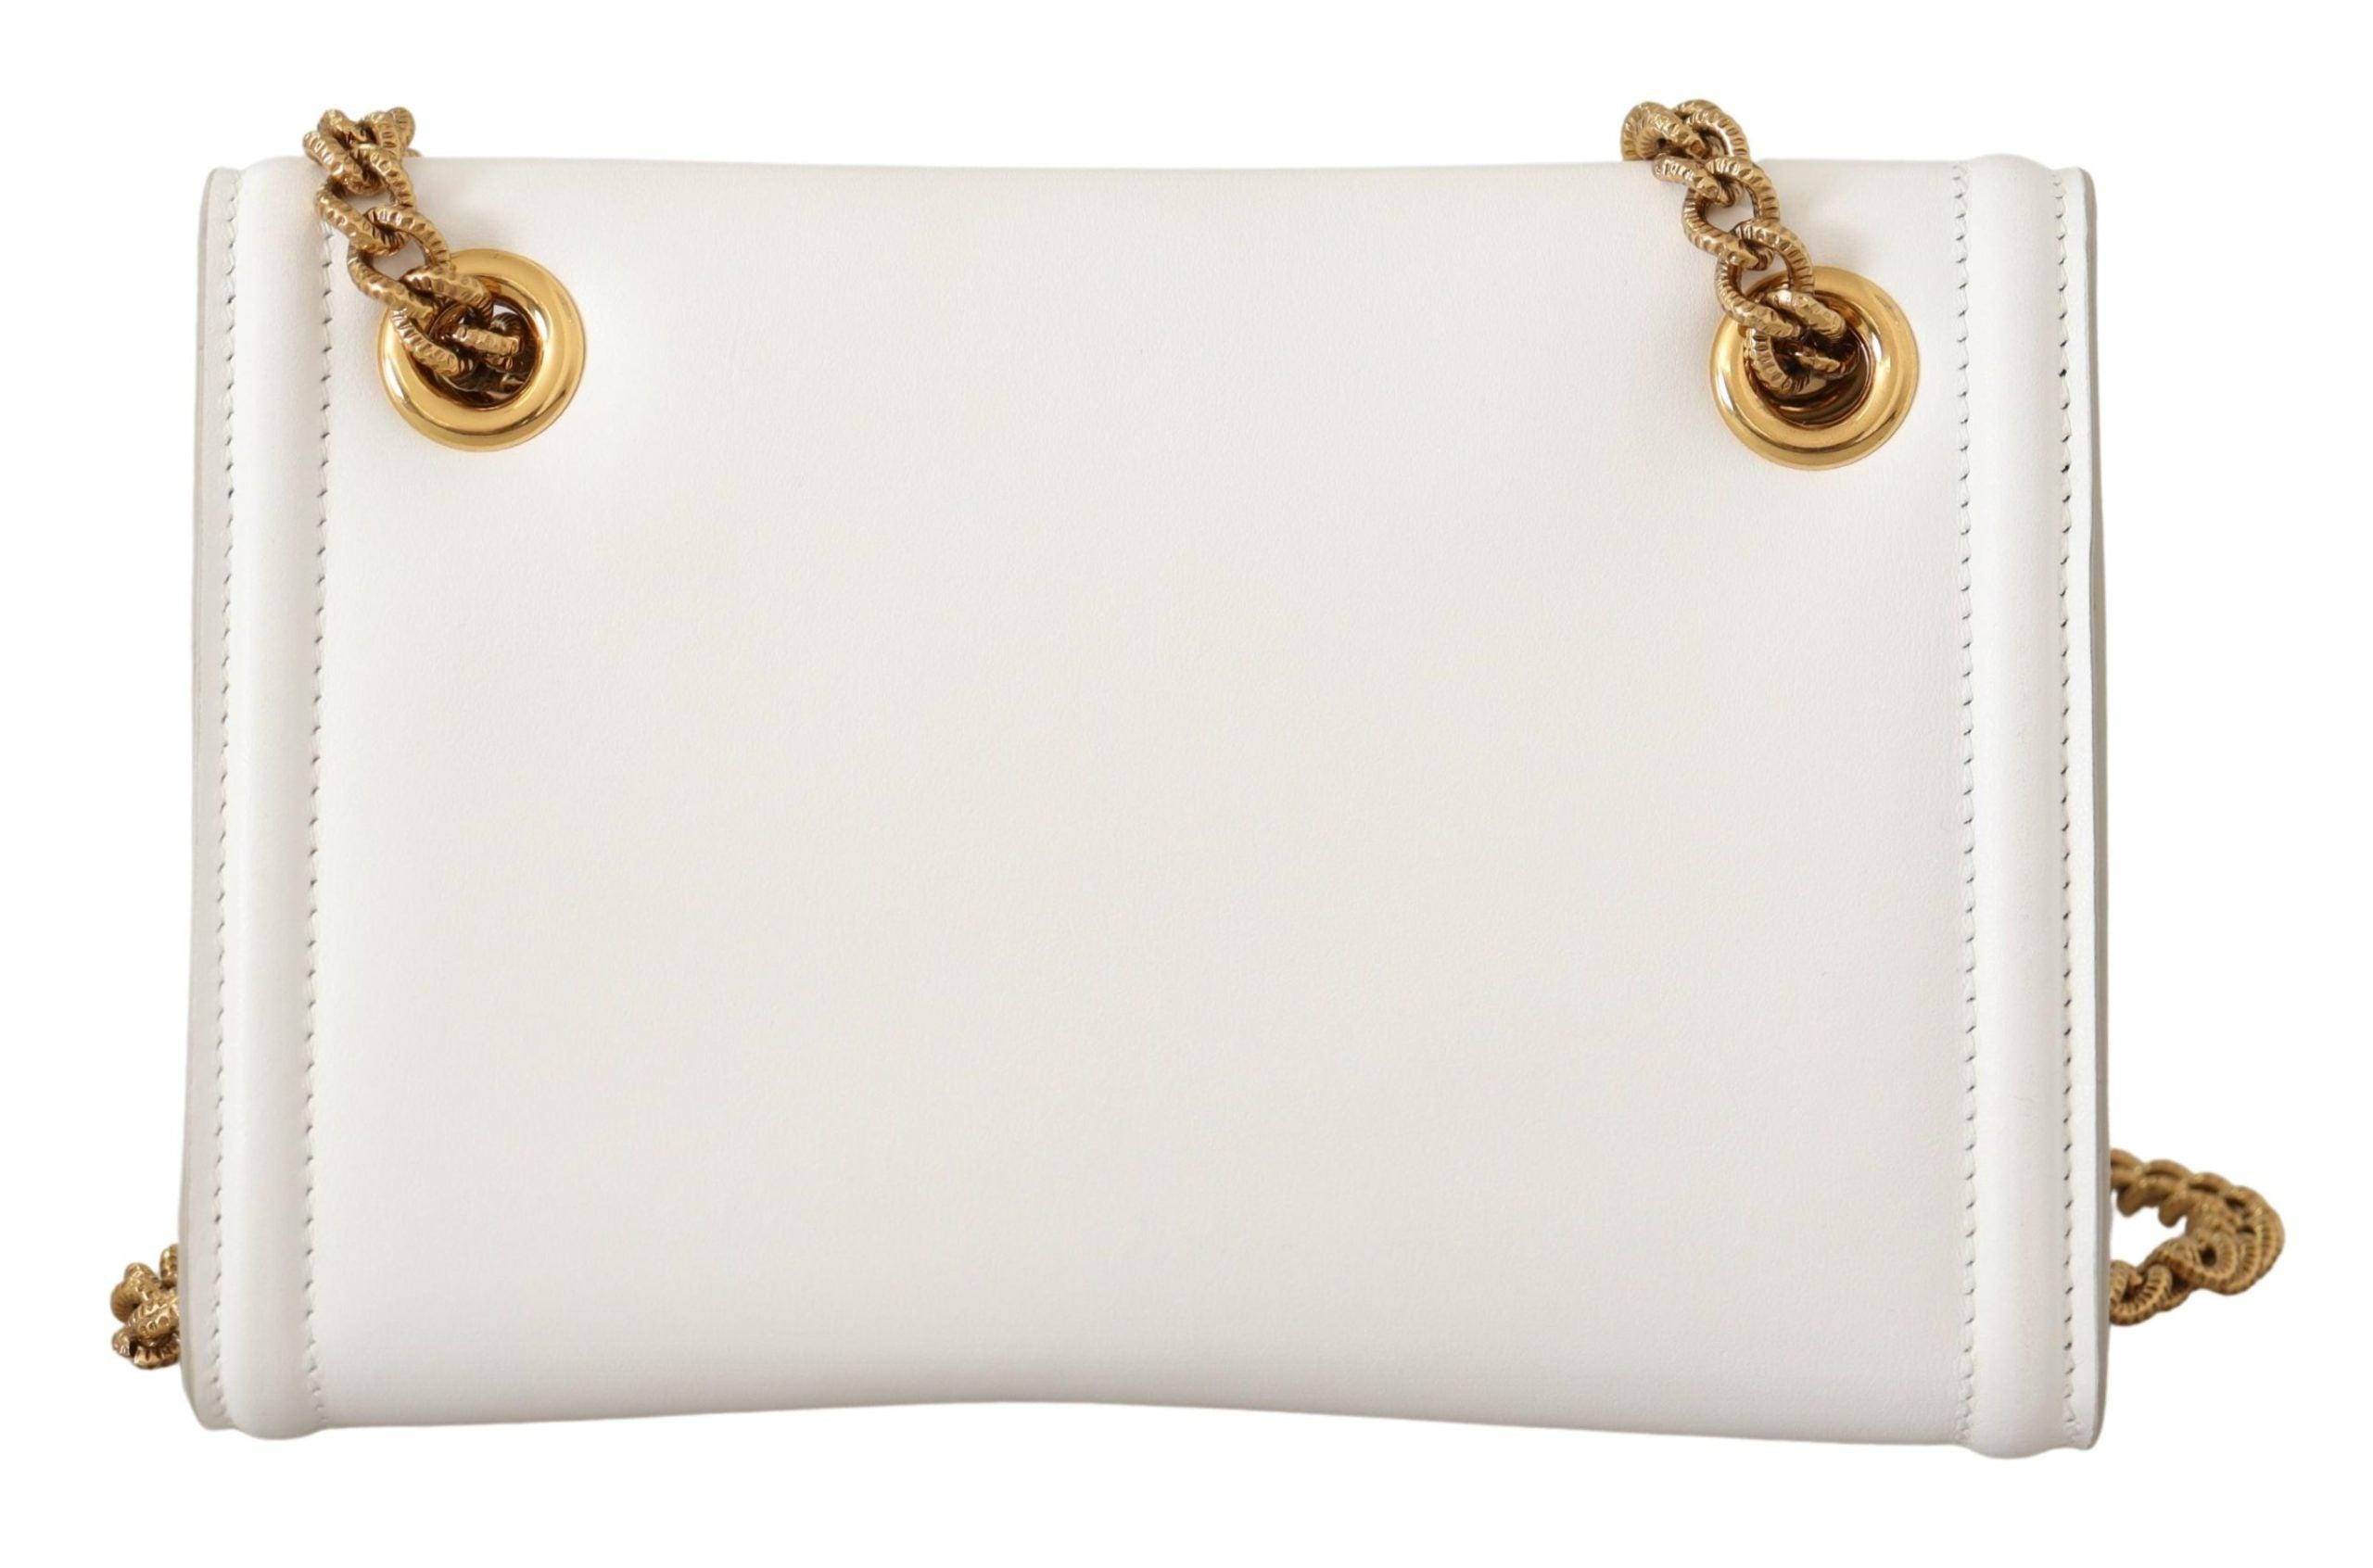 Devotion Small Leather Shoulder Bag in White - Dolce Gabbana